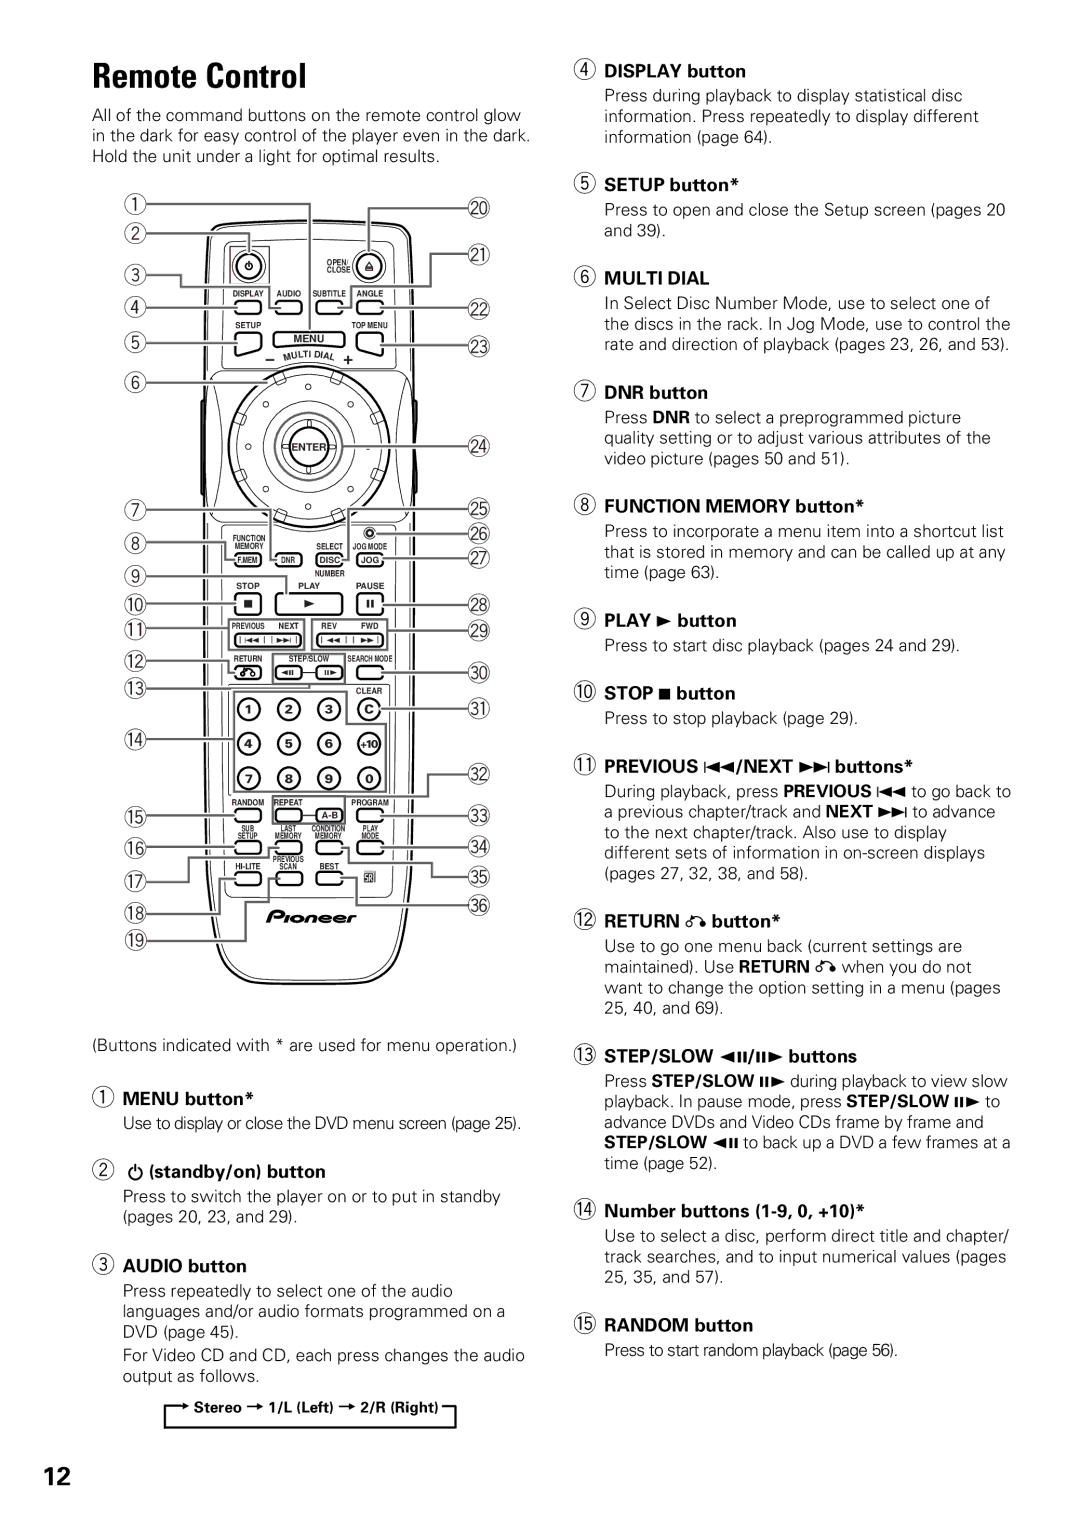 Pioneer DV-F727 operating instructions Remote Control, Multi Dial 